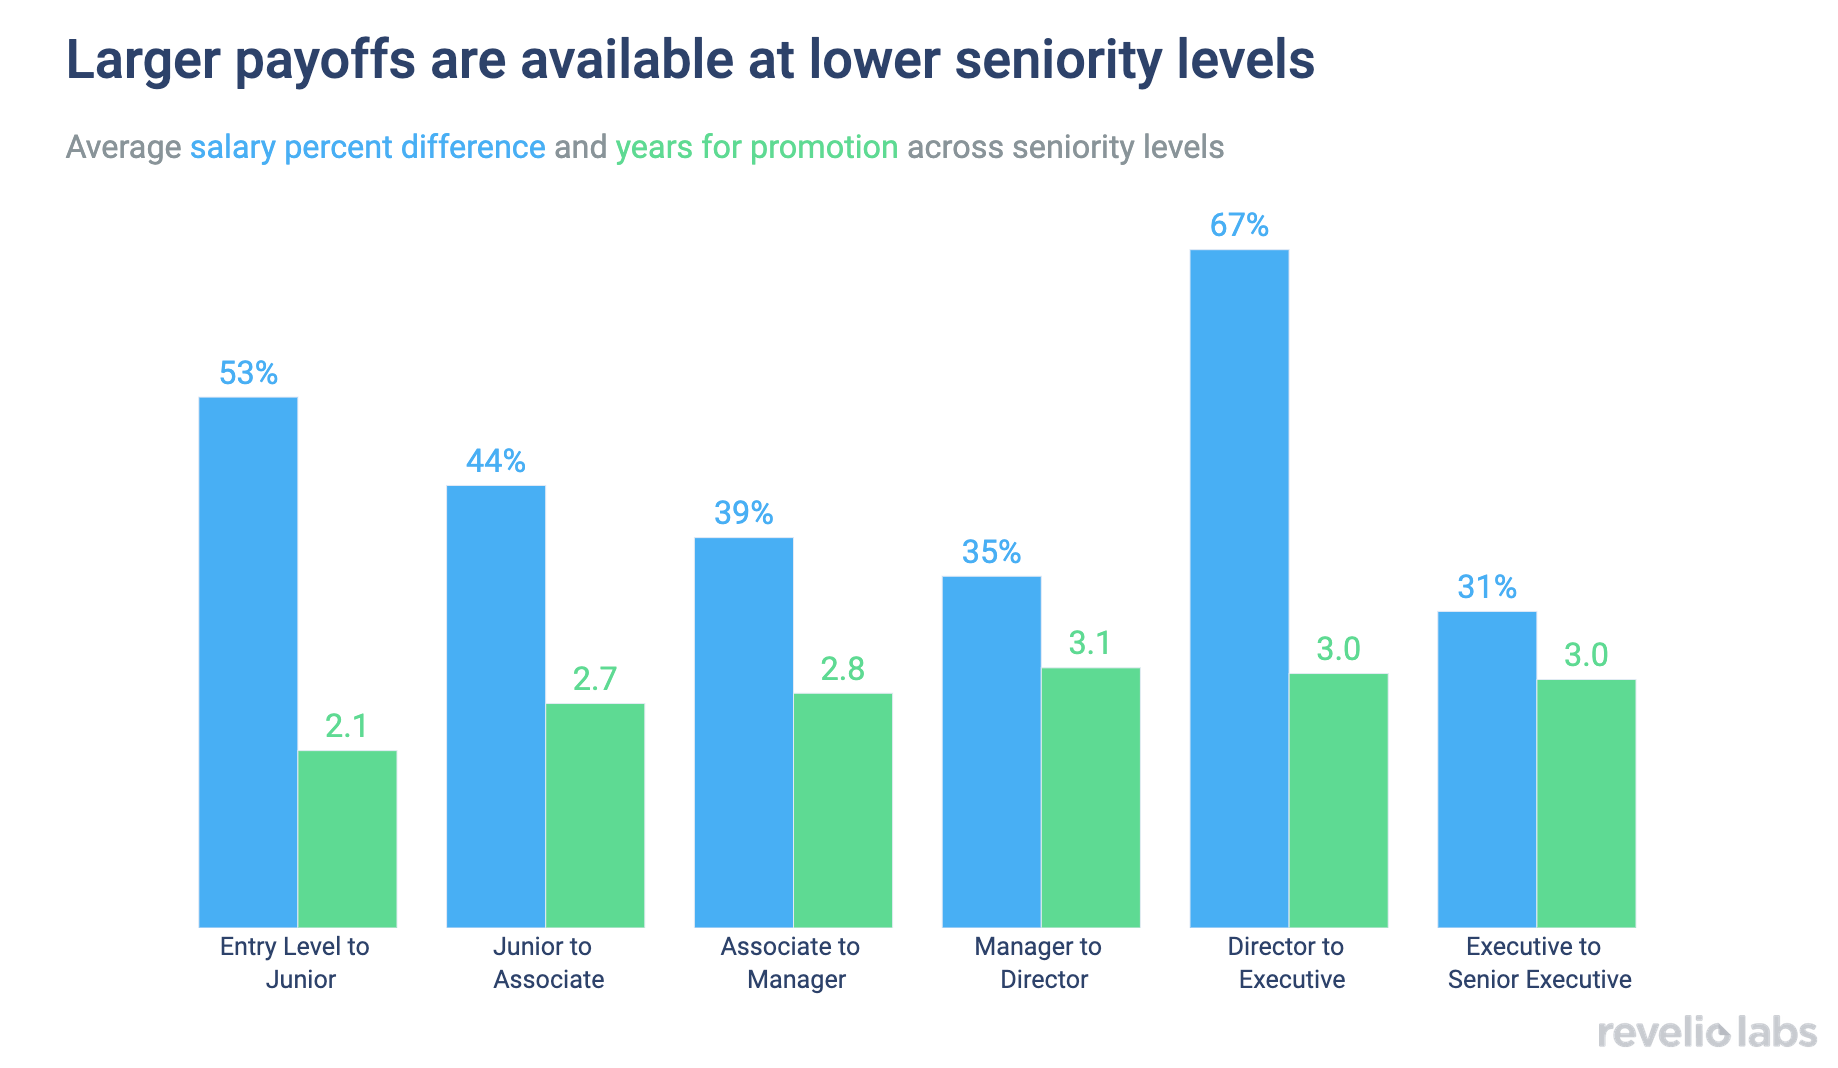 Larger payoffs are available at lower seniority levels